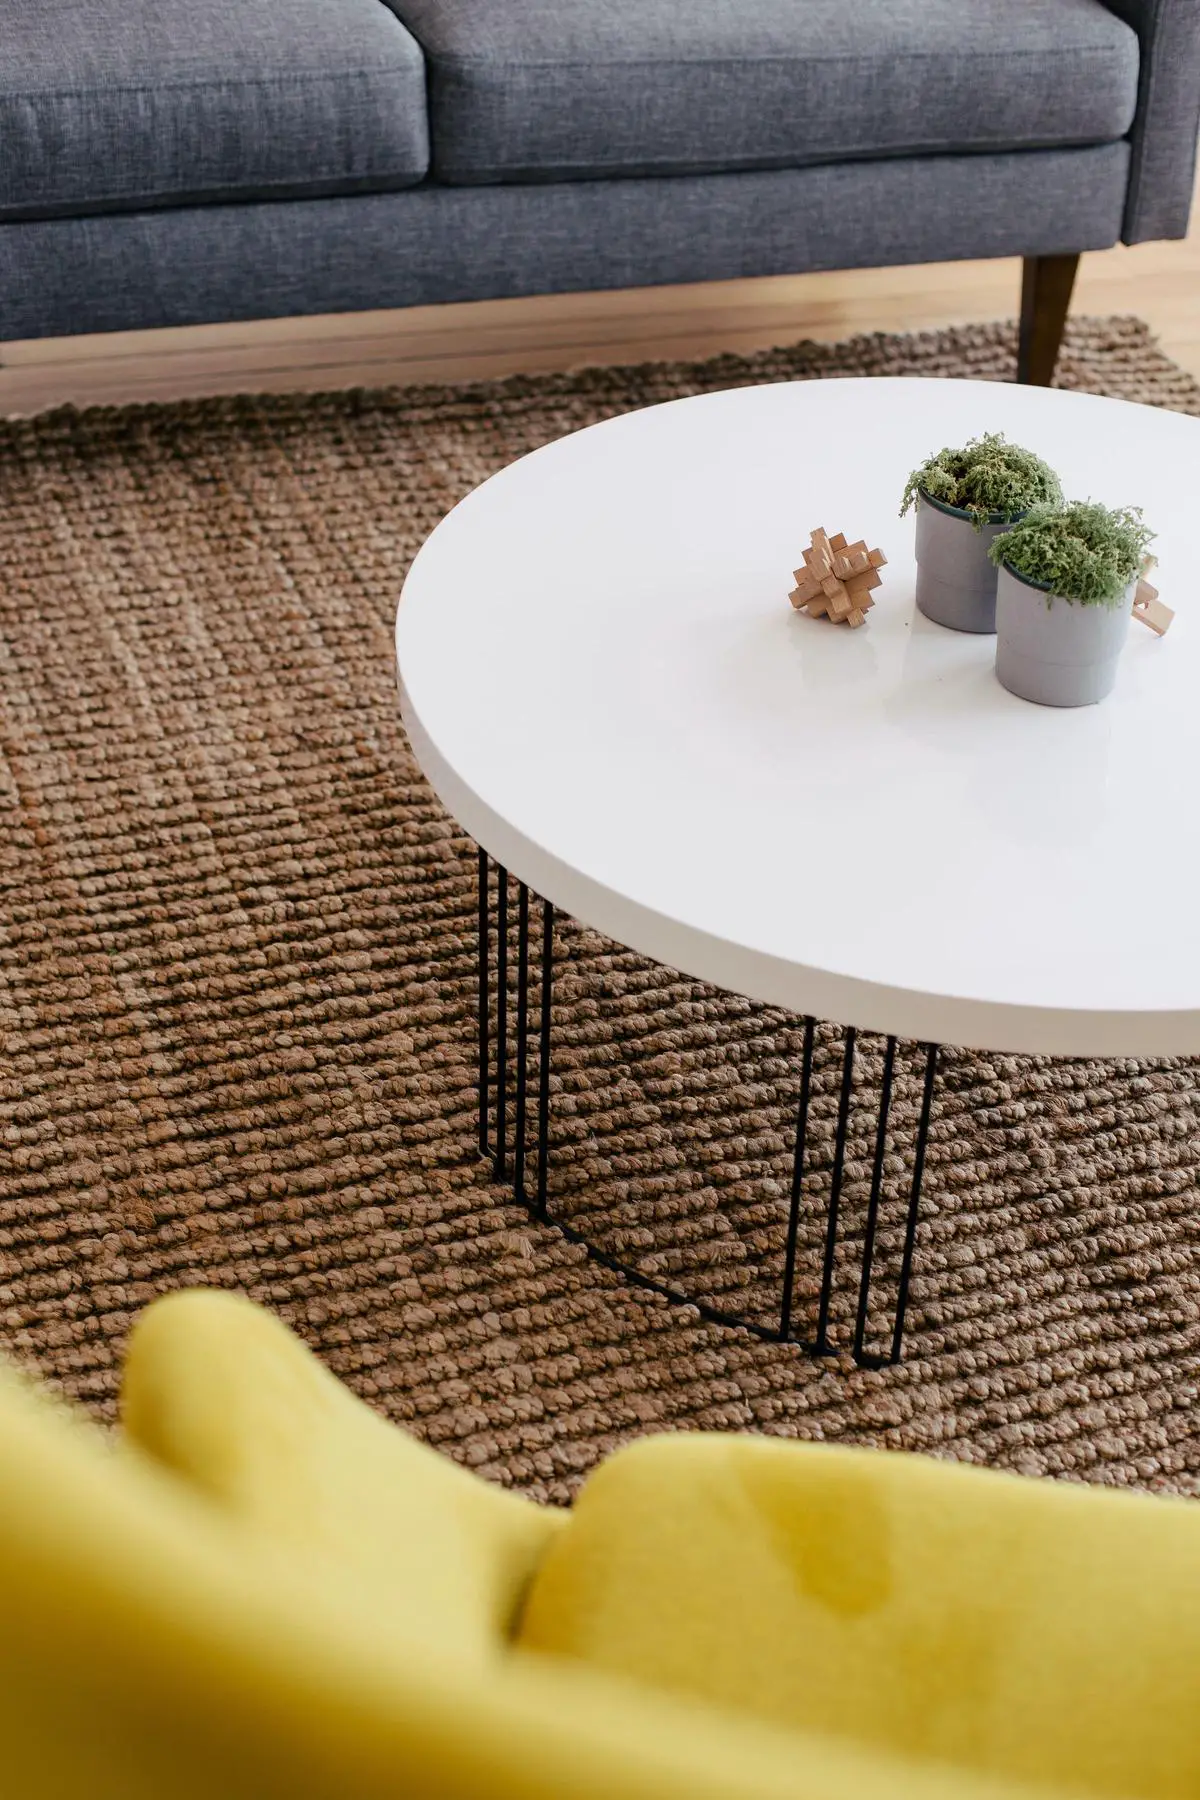 A beautifully customized IKEA coffee table with hairpin legs, storage baskets, and a marbled tabletop.